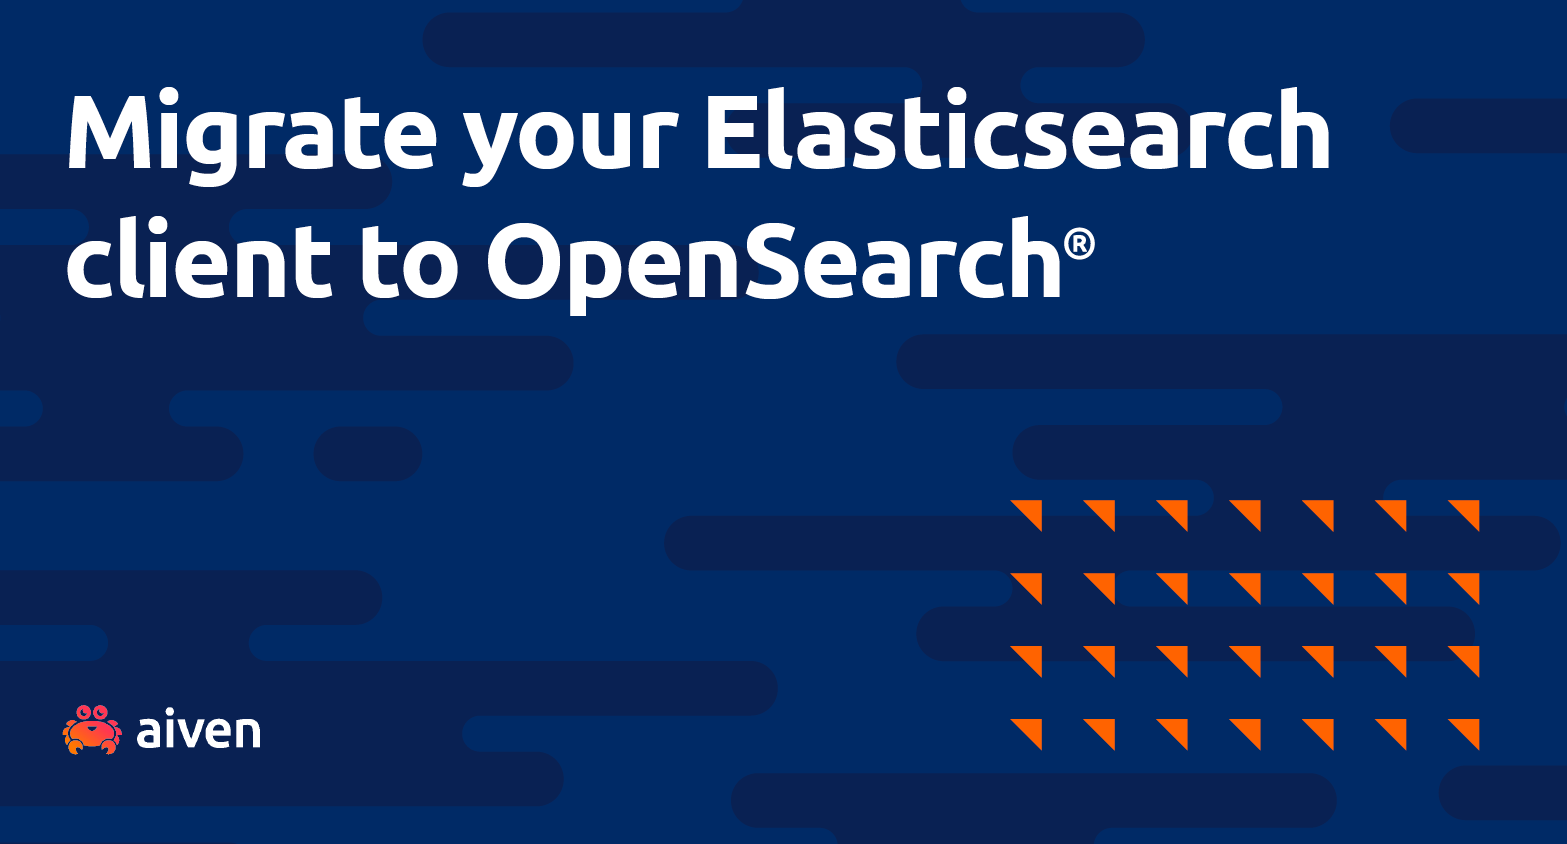 Migrate your Elasticsearch client to OpenSearch® illustration